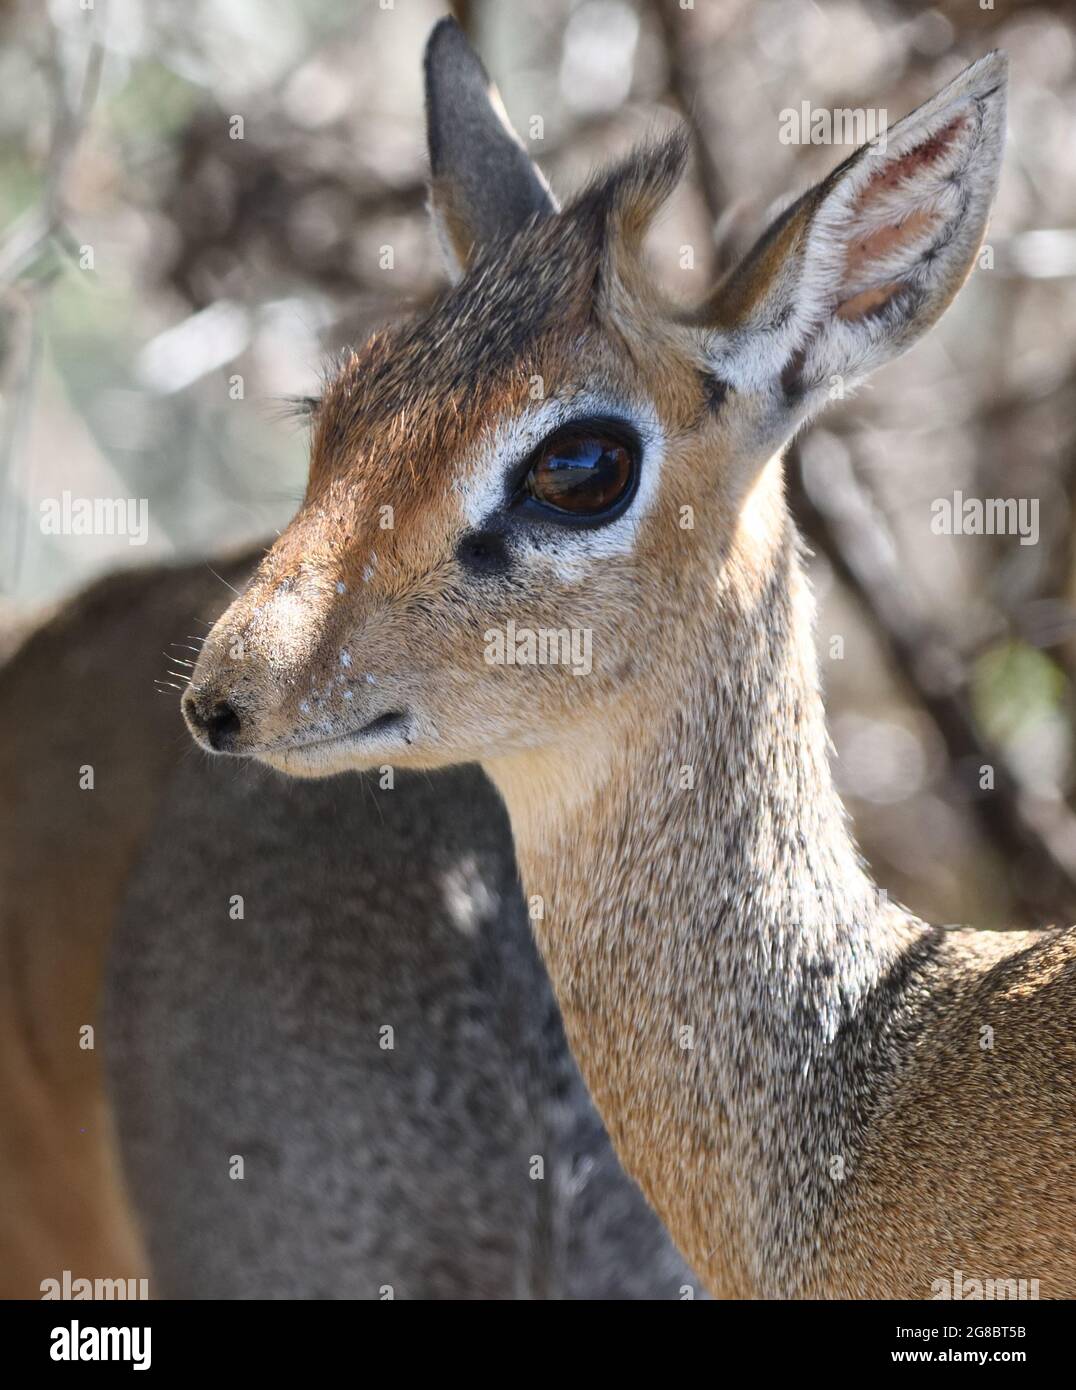 Female Kirk's dik-dik (Madoqua kirkii) with her mate in the background showing its delicate build and huge eyes. Tarangire National Park, Tanzania. Stock Photo